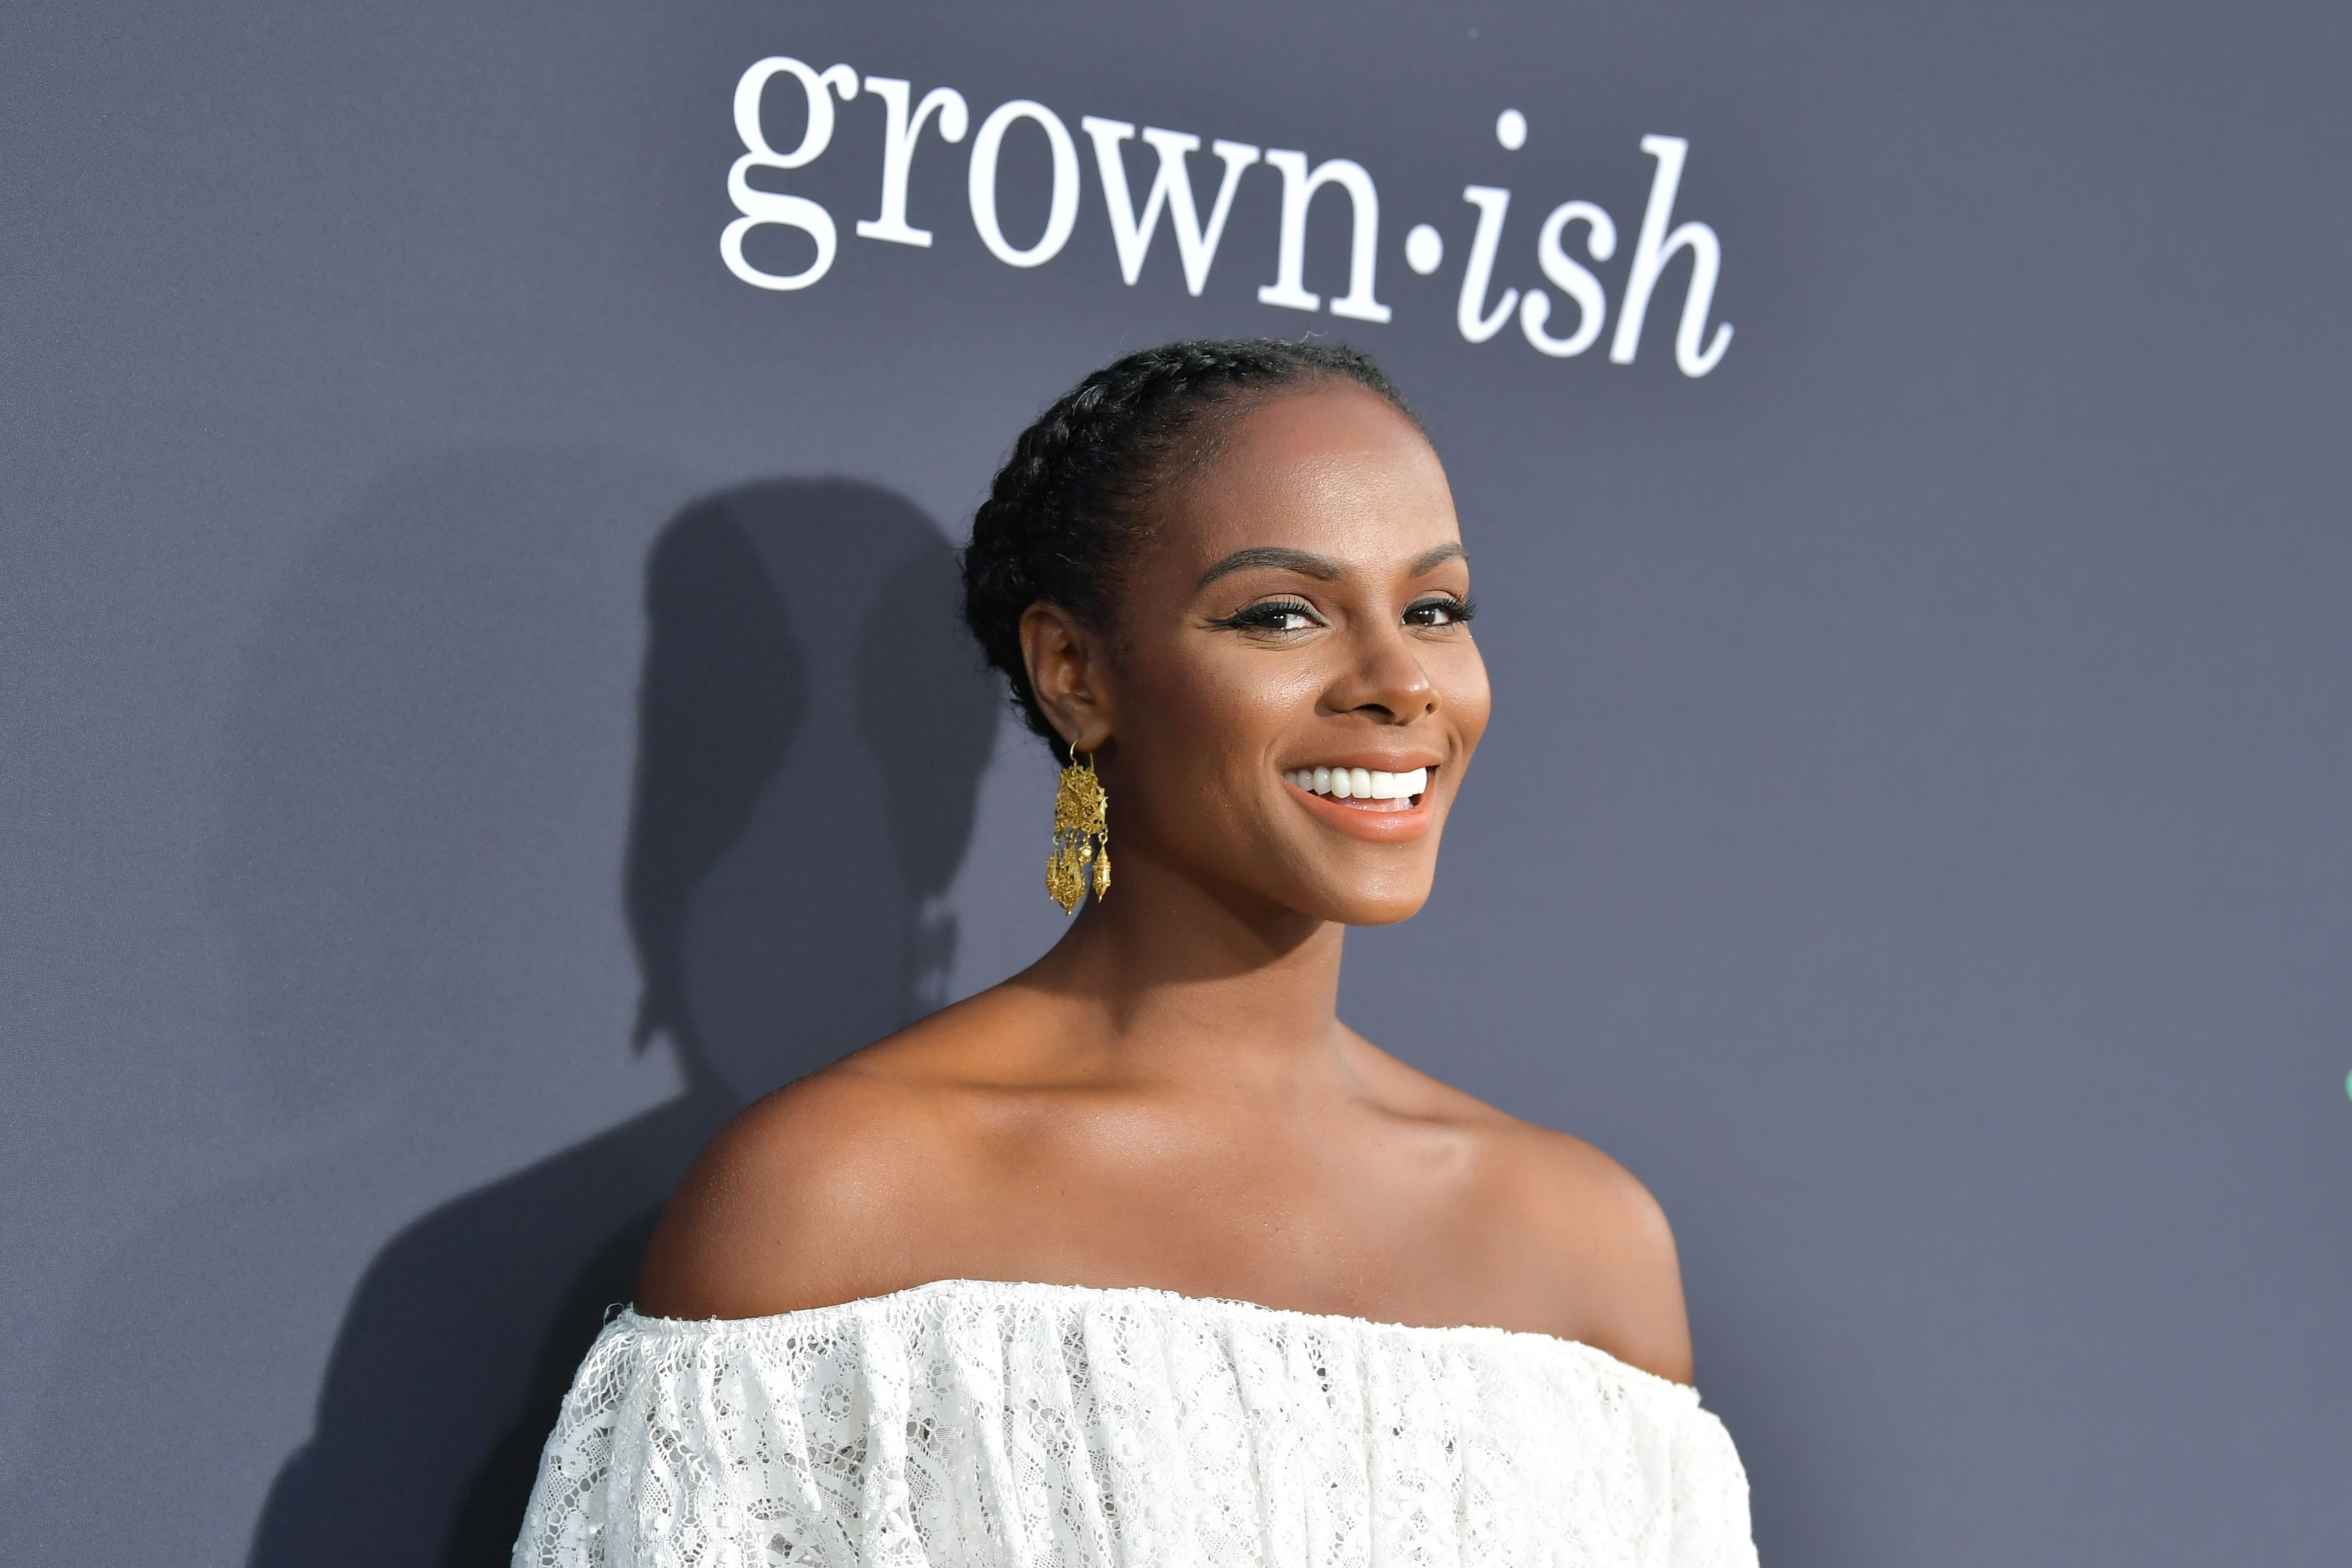 Tika Sumpter at PopSugar X ABC's "Embrace Your Ish" event at Goya Studios on September 17, 2019 in Los Angeles, California. | Photo: Getty Images